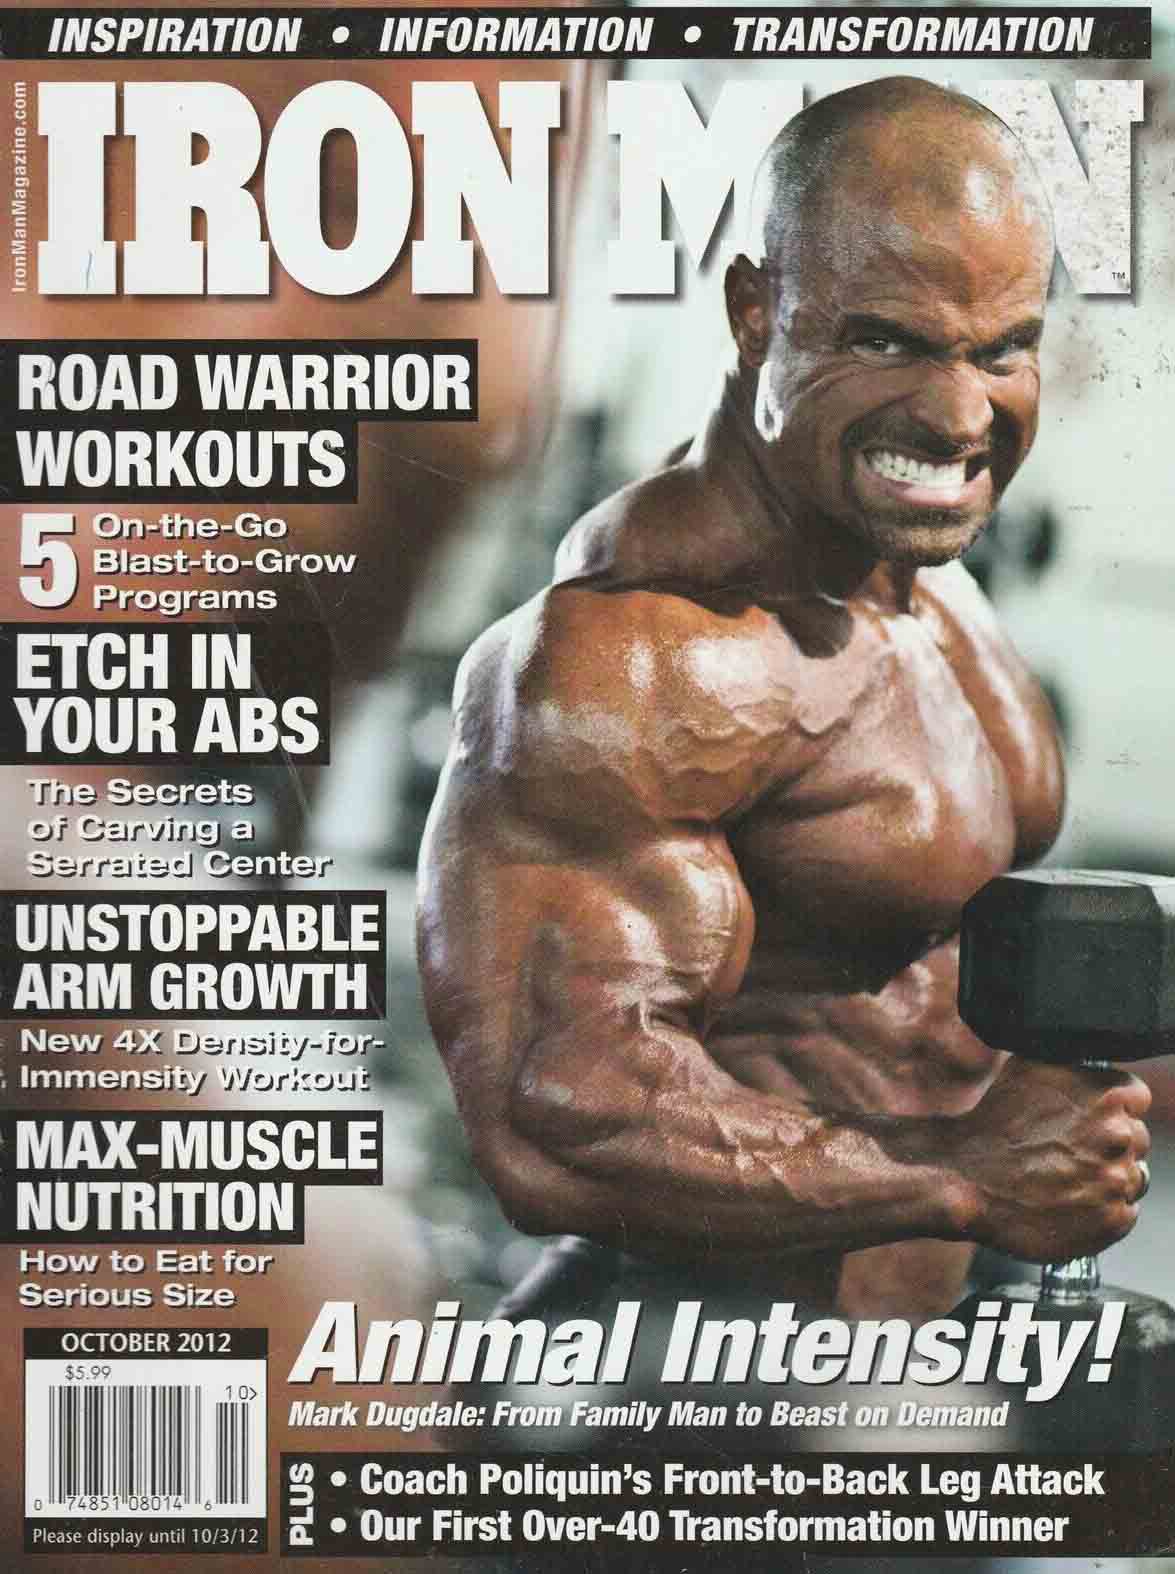 Ironman October 2012 magazine back issue Ironman magizine back copy Ironman October 2012 American magazine Back Issue about bodybuilding, weightlifting, and powerlifting. Published by Iron Man Publishing. Road Warrior Workouts 5 On-The-Go Blast-To-Grow Programs.